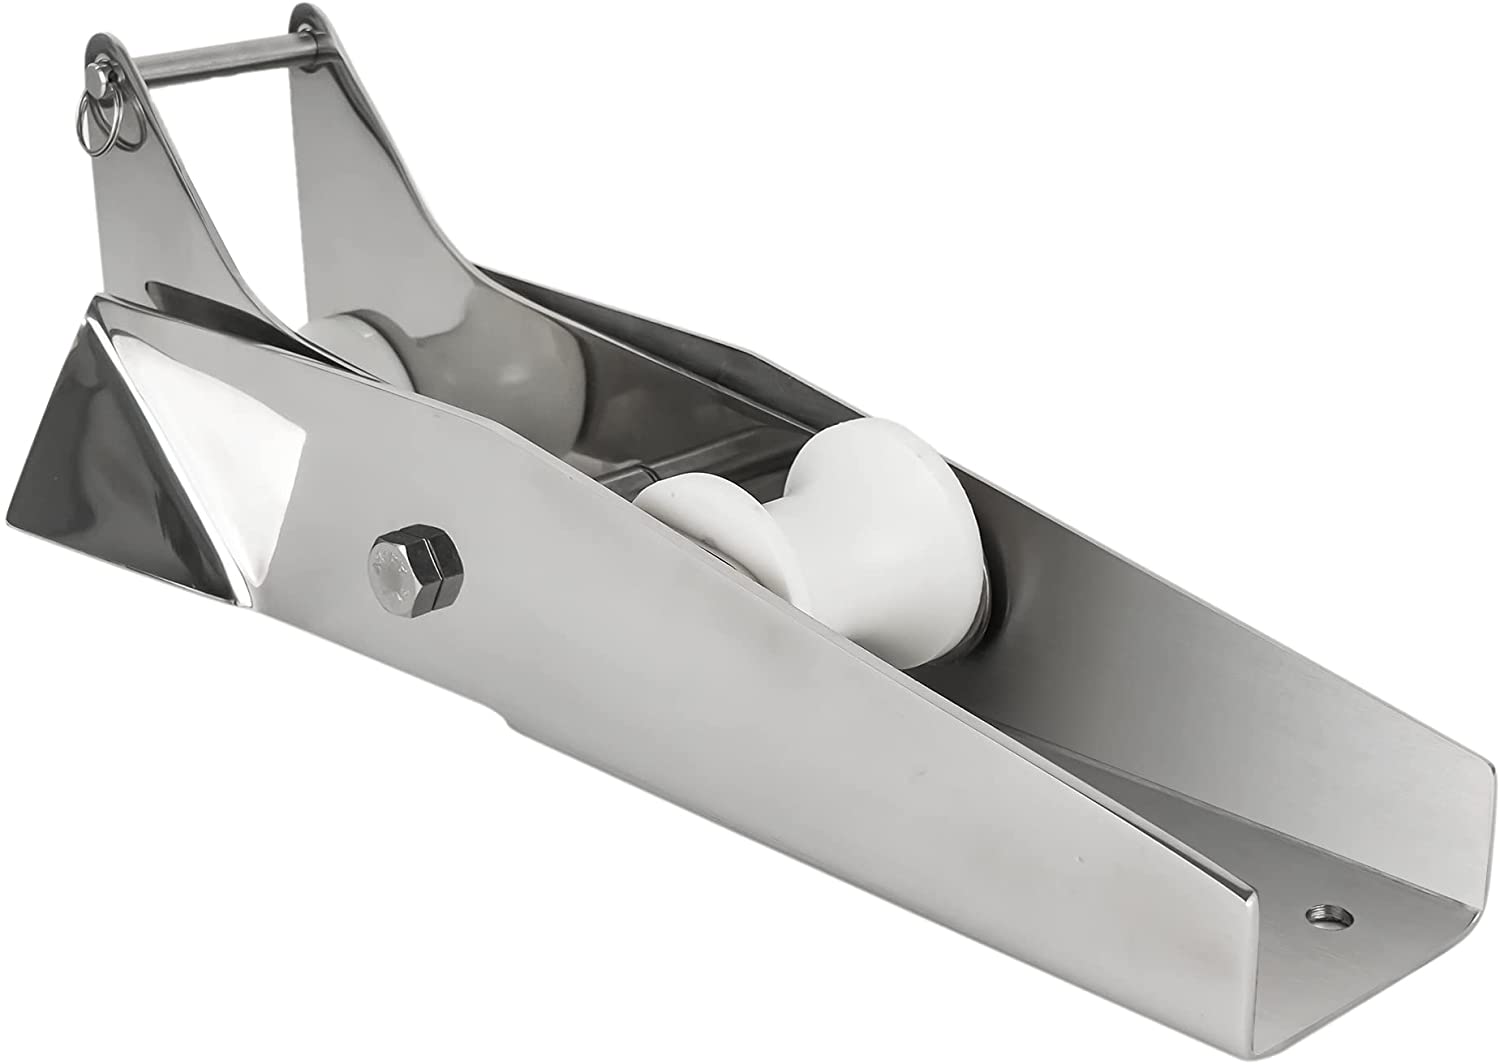 Five Oceans Self-launching Anchor Bow Roller 13-1/8 in. AISI316 Stainless Steel FO-73-Canadian Marine &amp; Outdoor Equipment